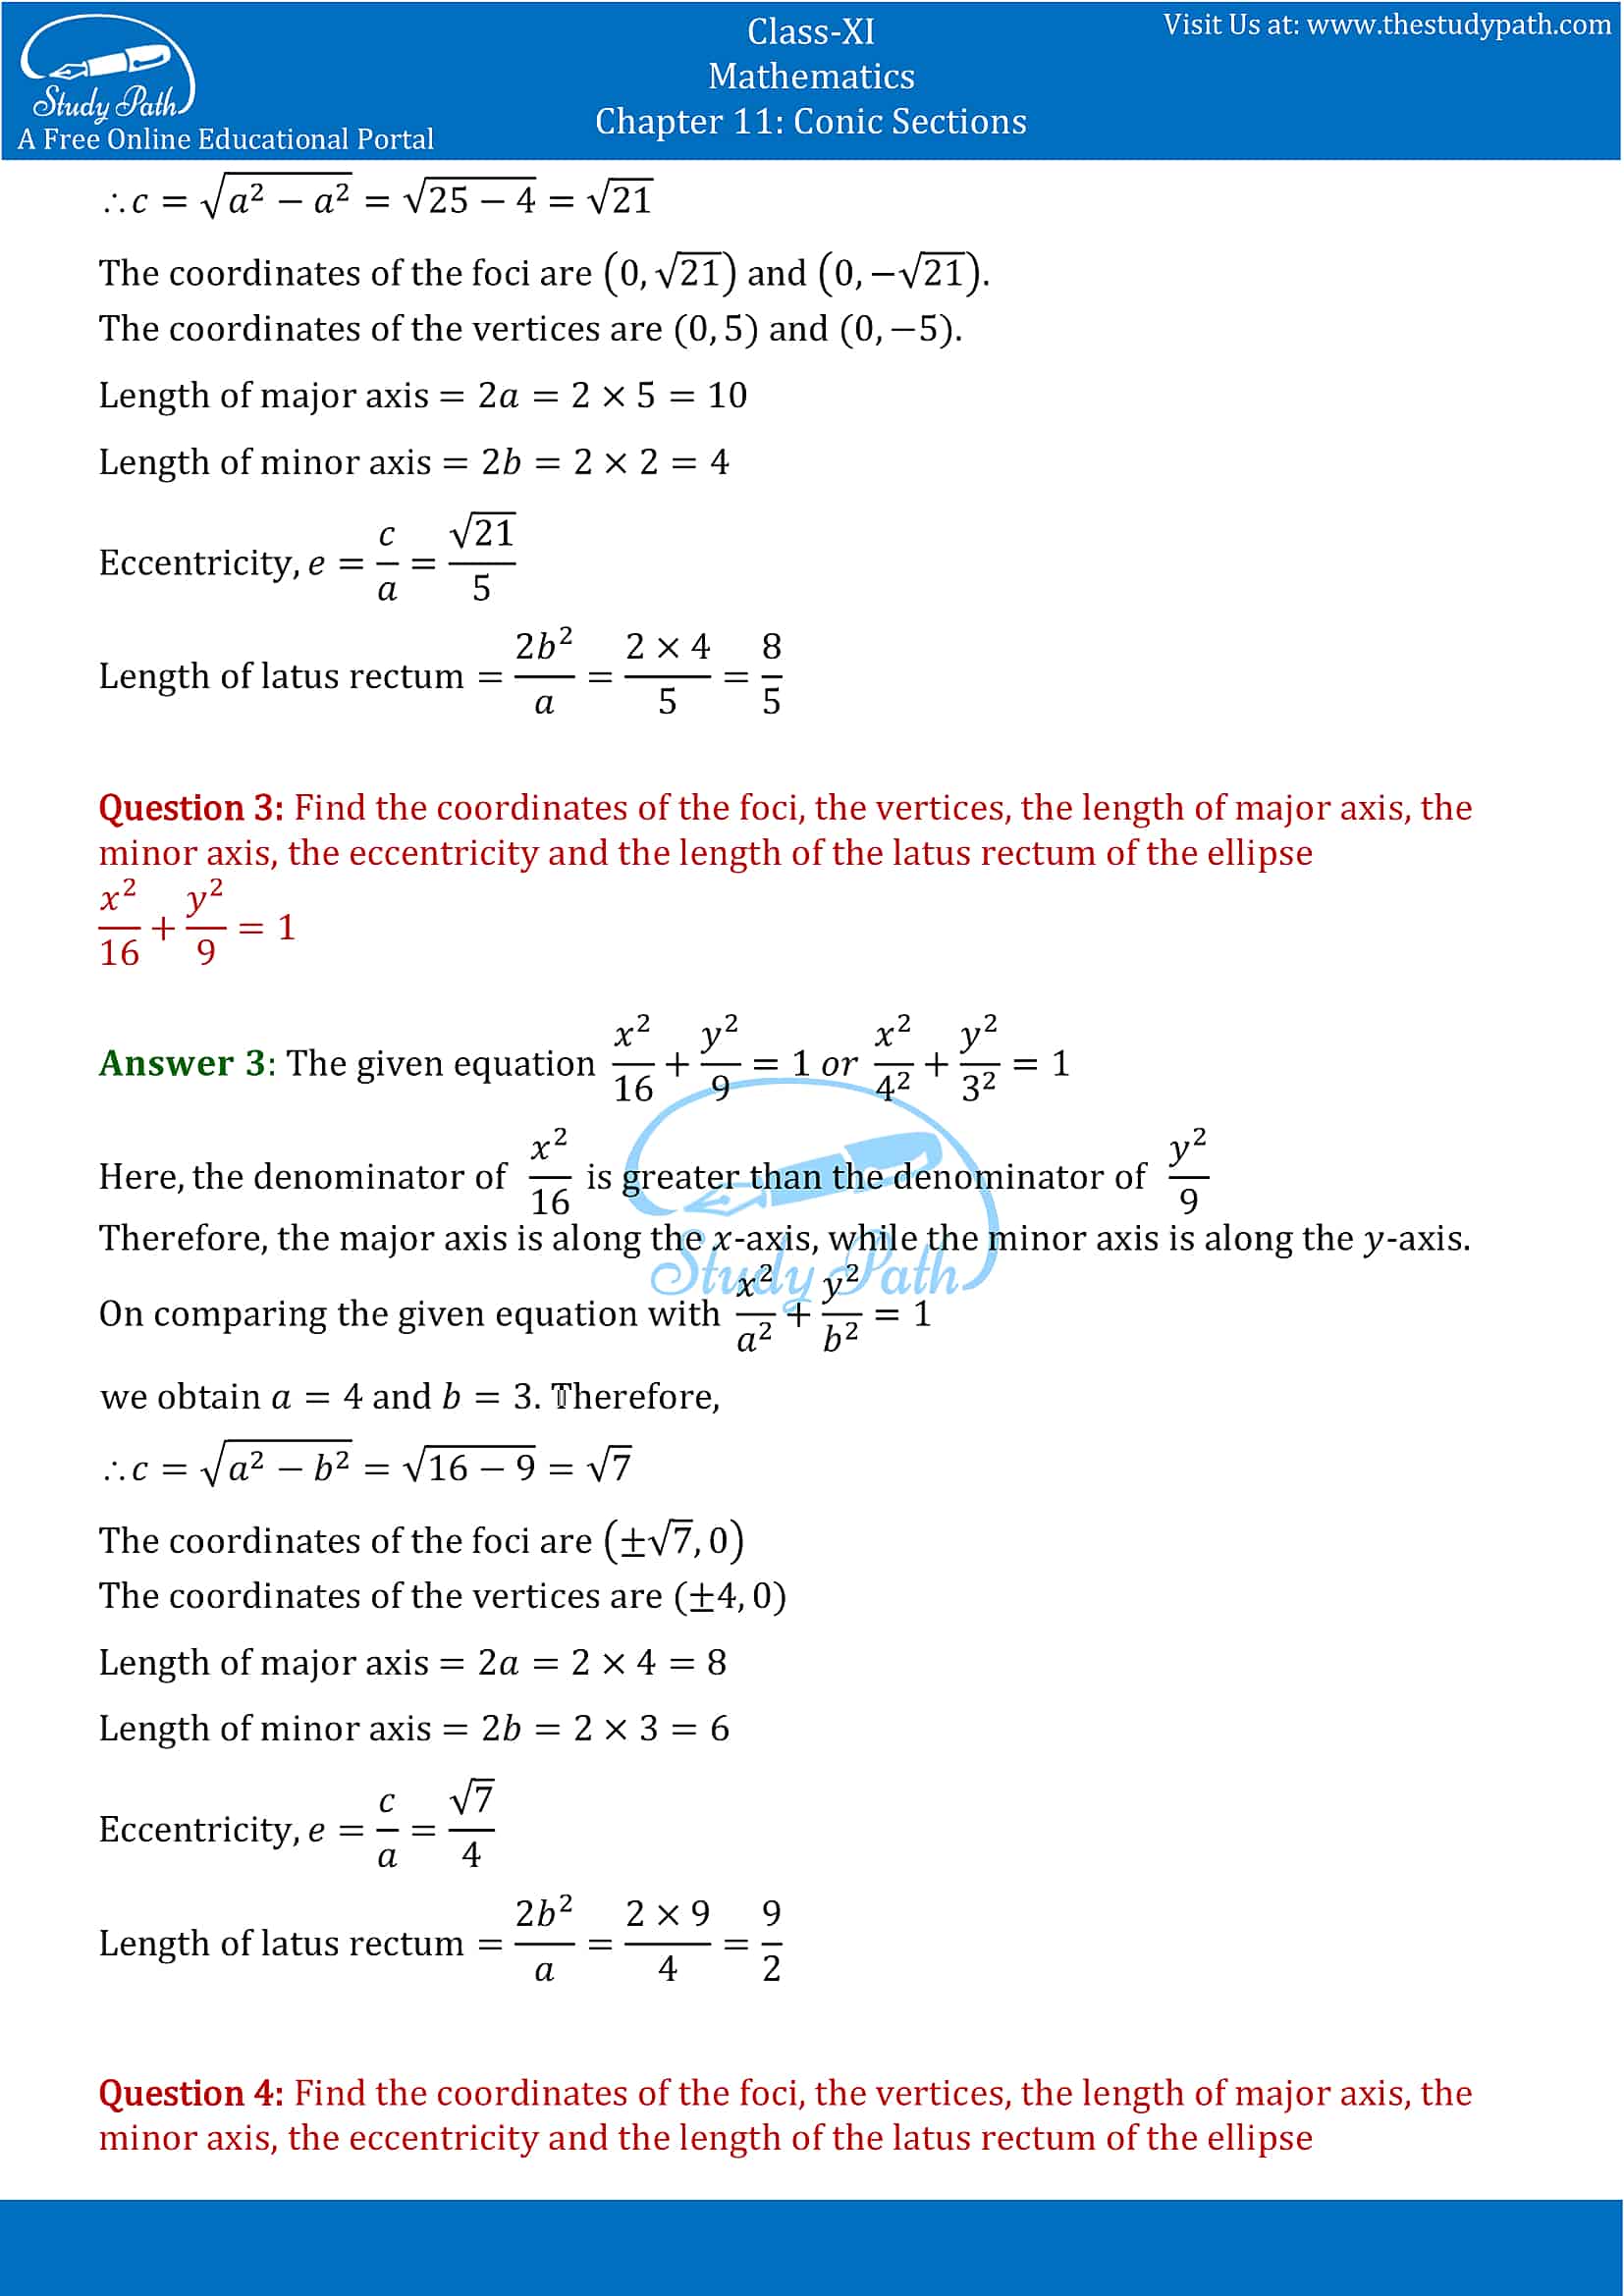 NCERT Solutions for Class 11 Maths chapter 11 Conic Section Exercise 11.3 Part-2